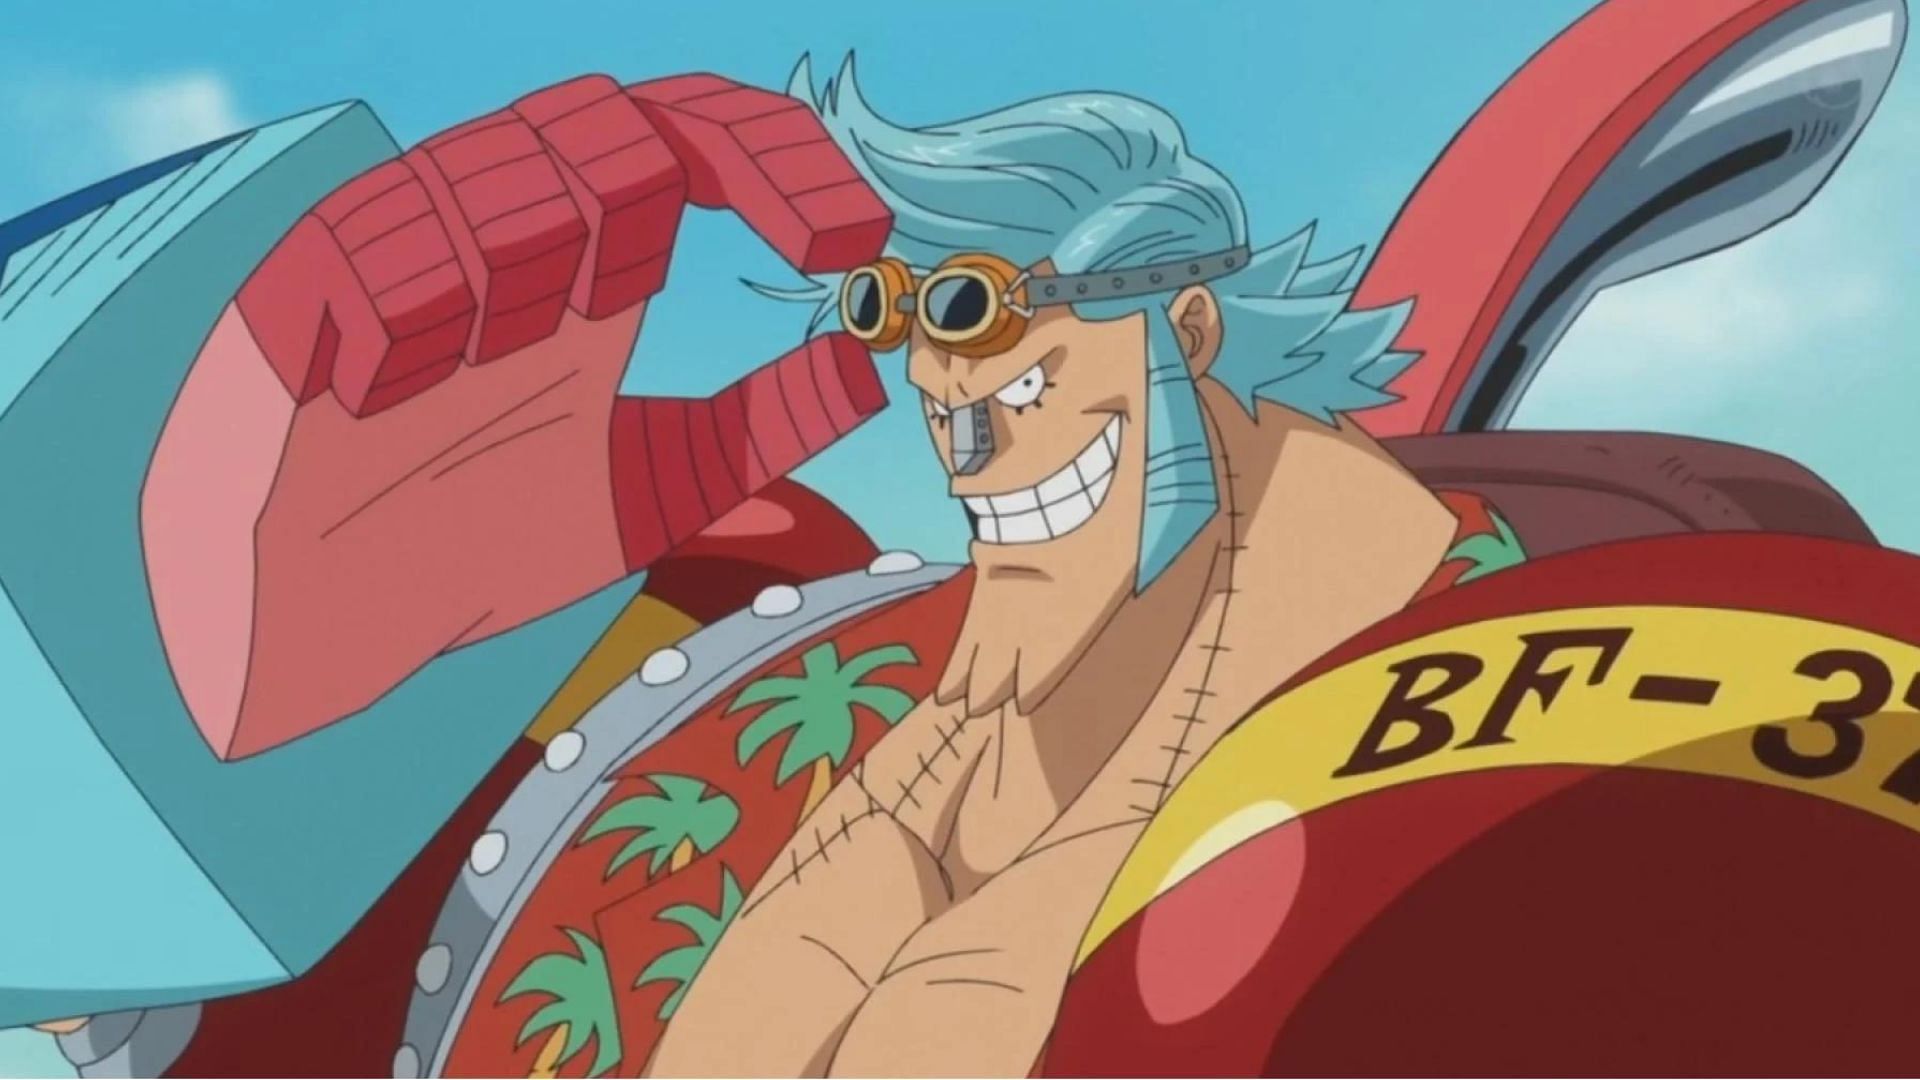 Franky from One Piece (Image via Toei Animation)